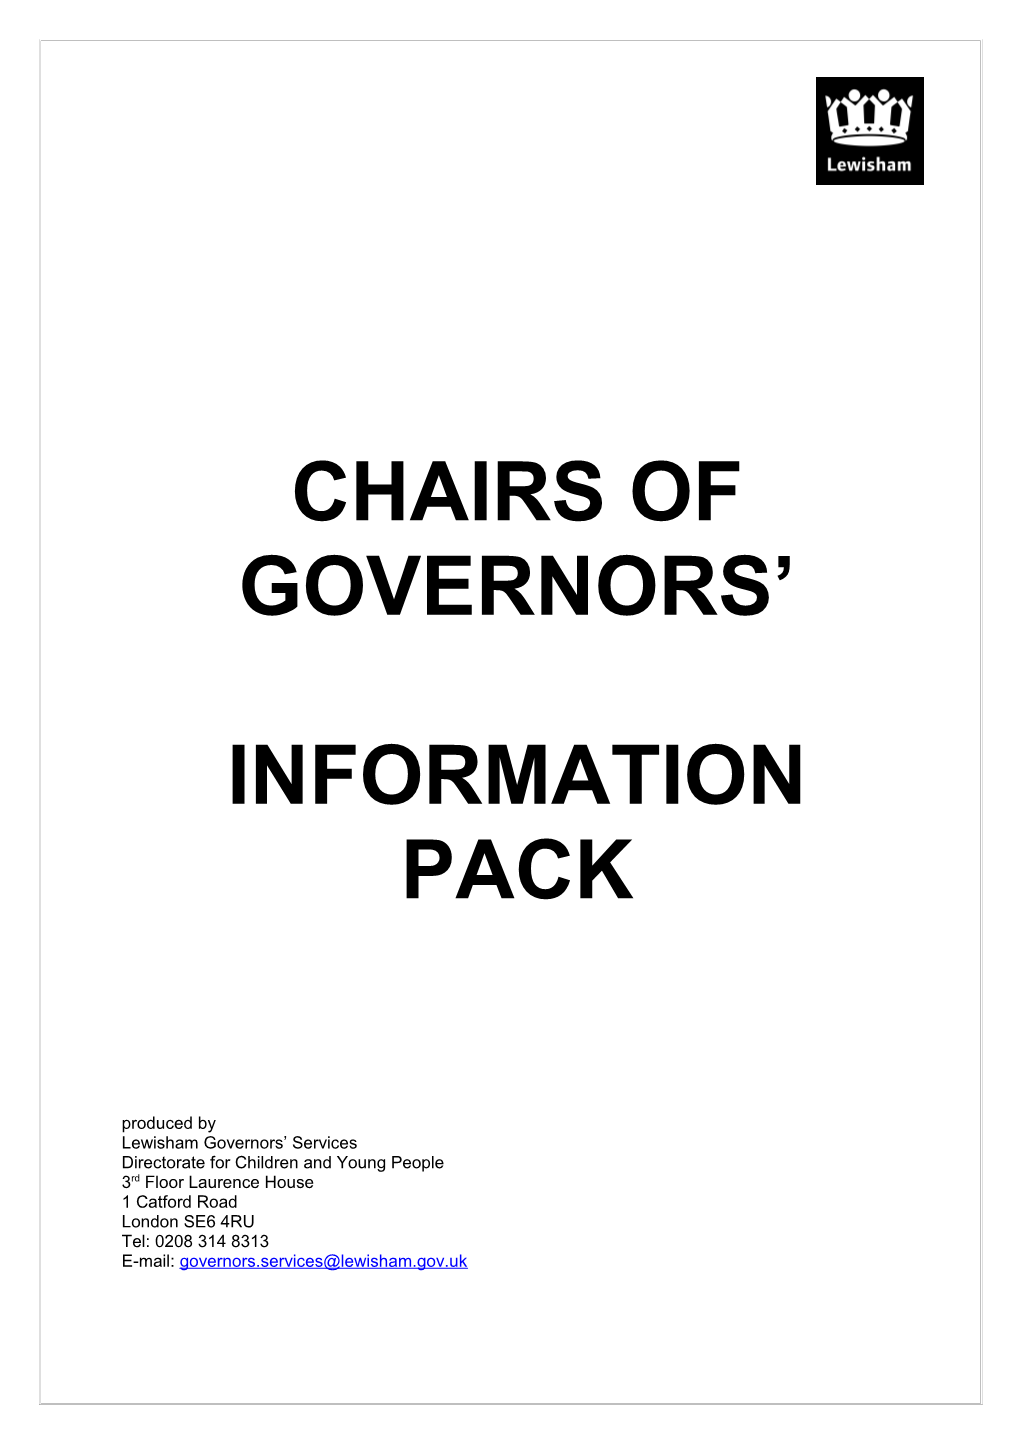 Chairs of Governors' Information Pack